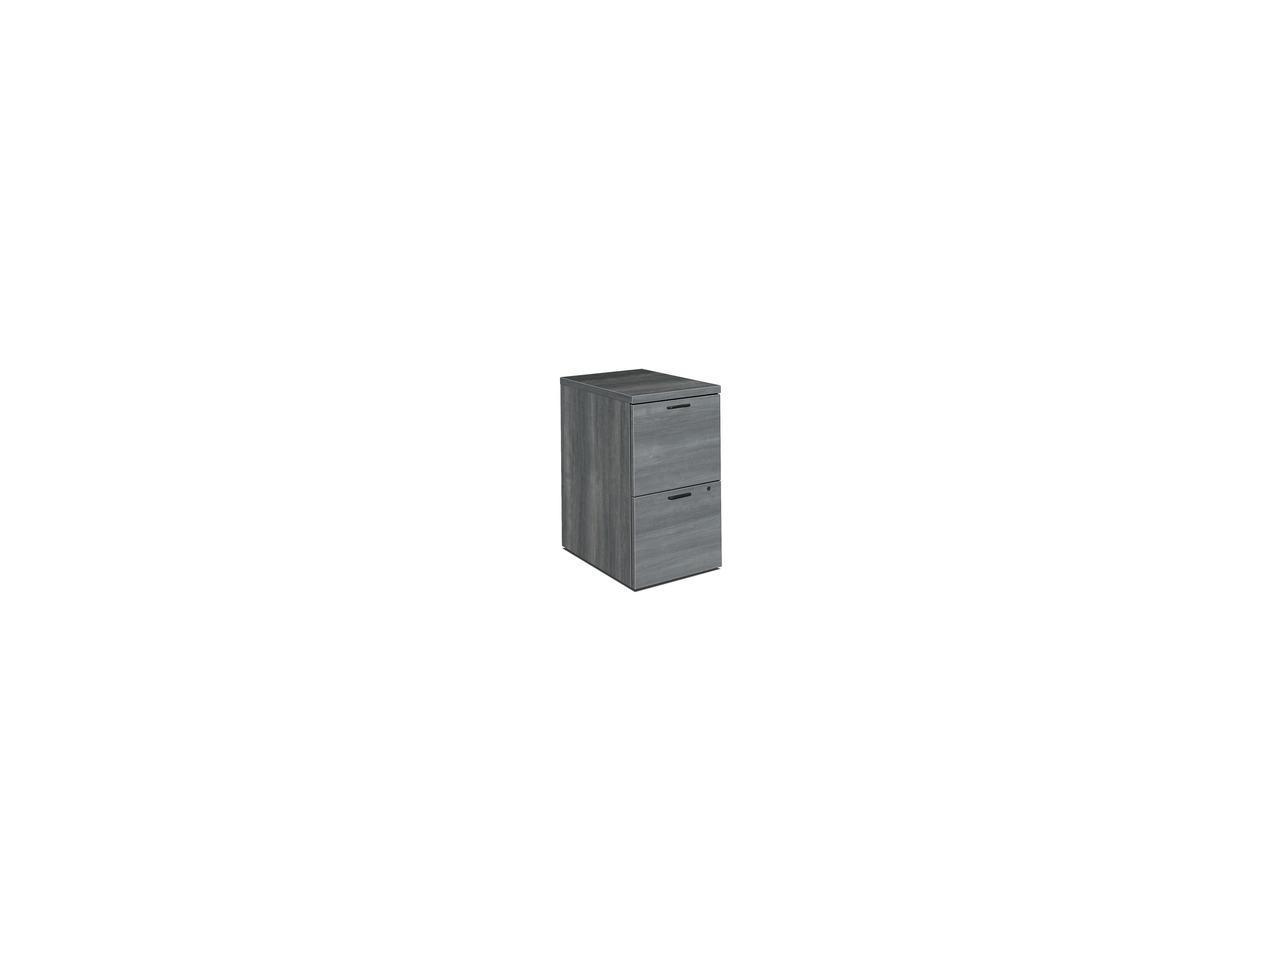 The HON HON105104LS1 15.8 x 22.8 x 28 in. 10500 Series Freestanding File & File Mobile Pedestal - image 1 of 3